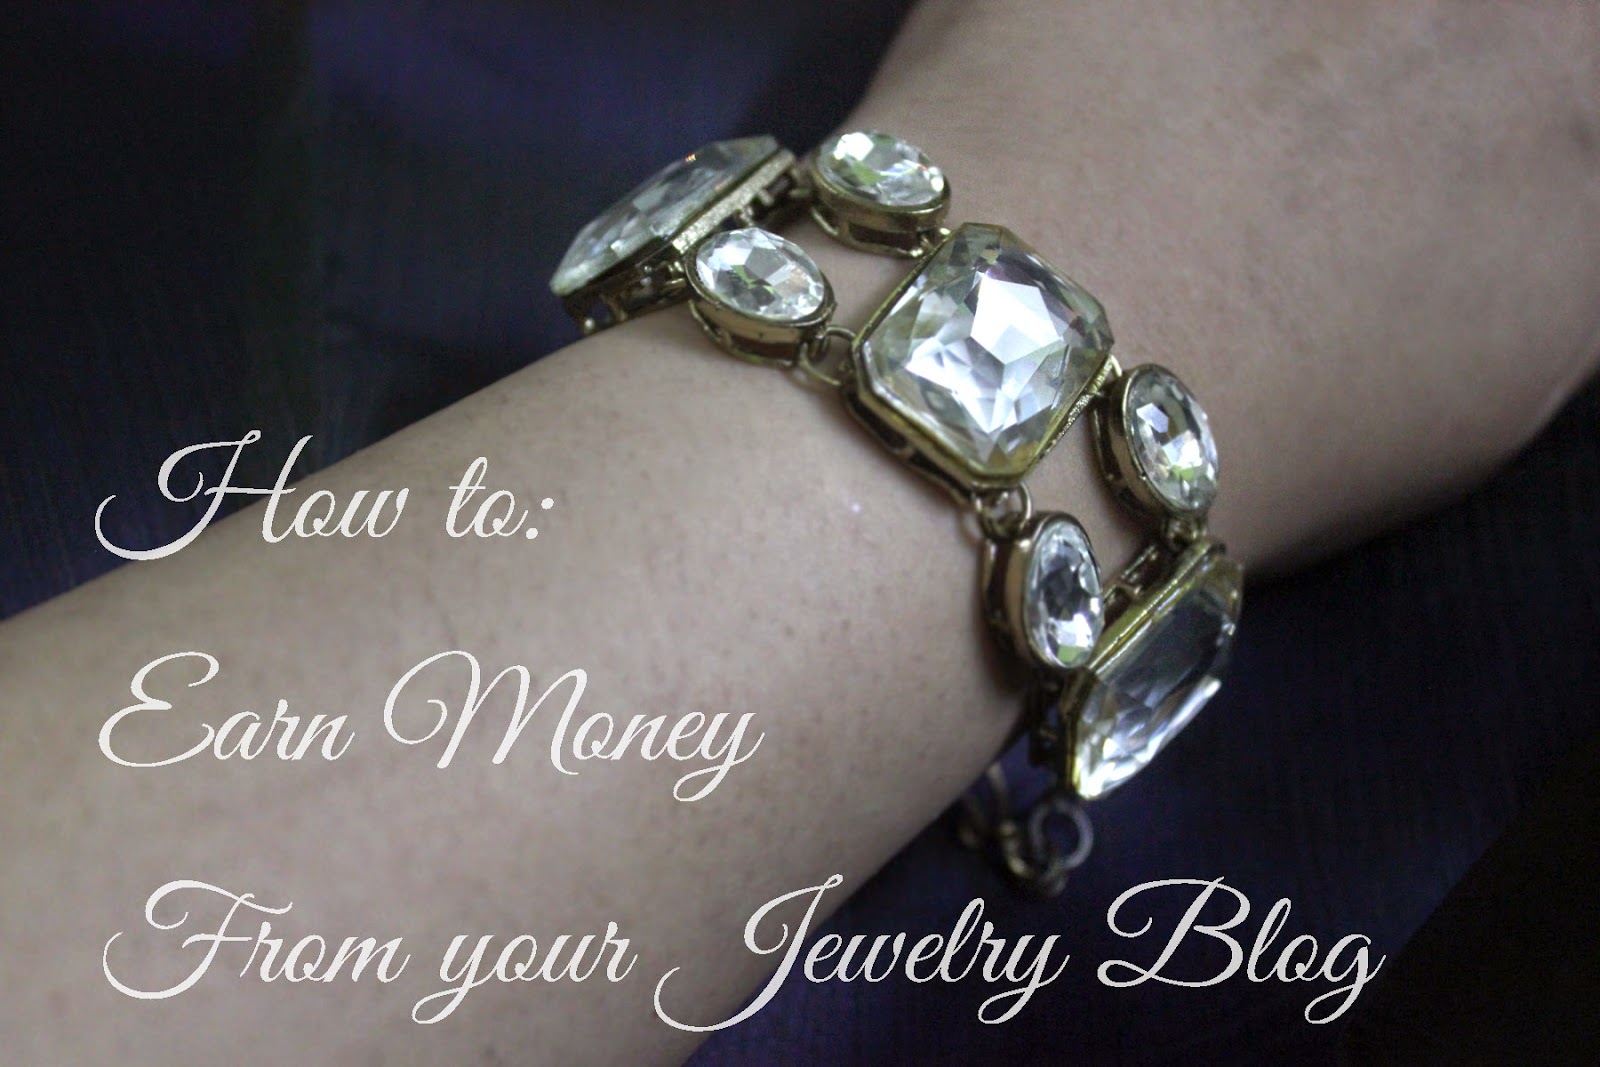 Earn from your jewelry blog